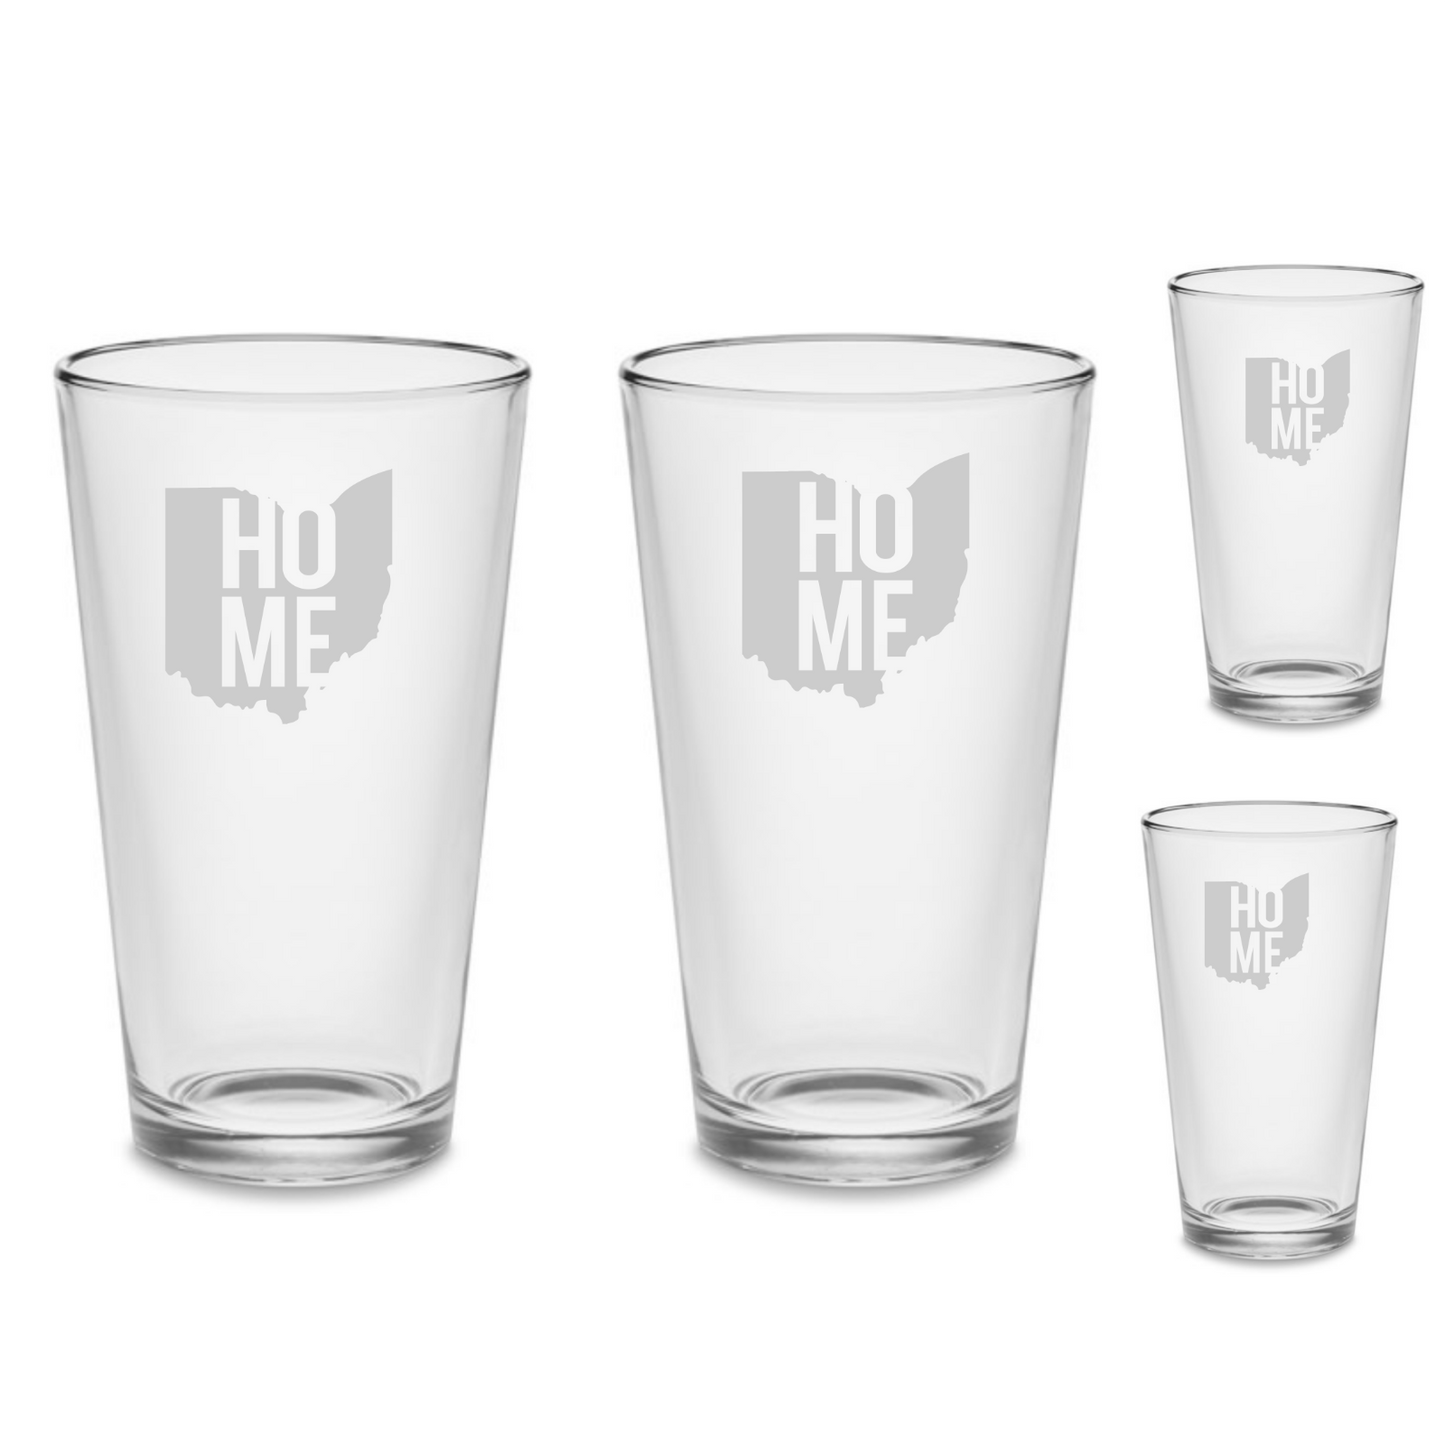 SET Ohio Home Pint Beer Glasses Tumblers Drinkware 16 oz. Cocktail Mixing Glass